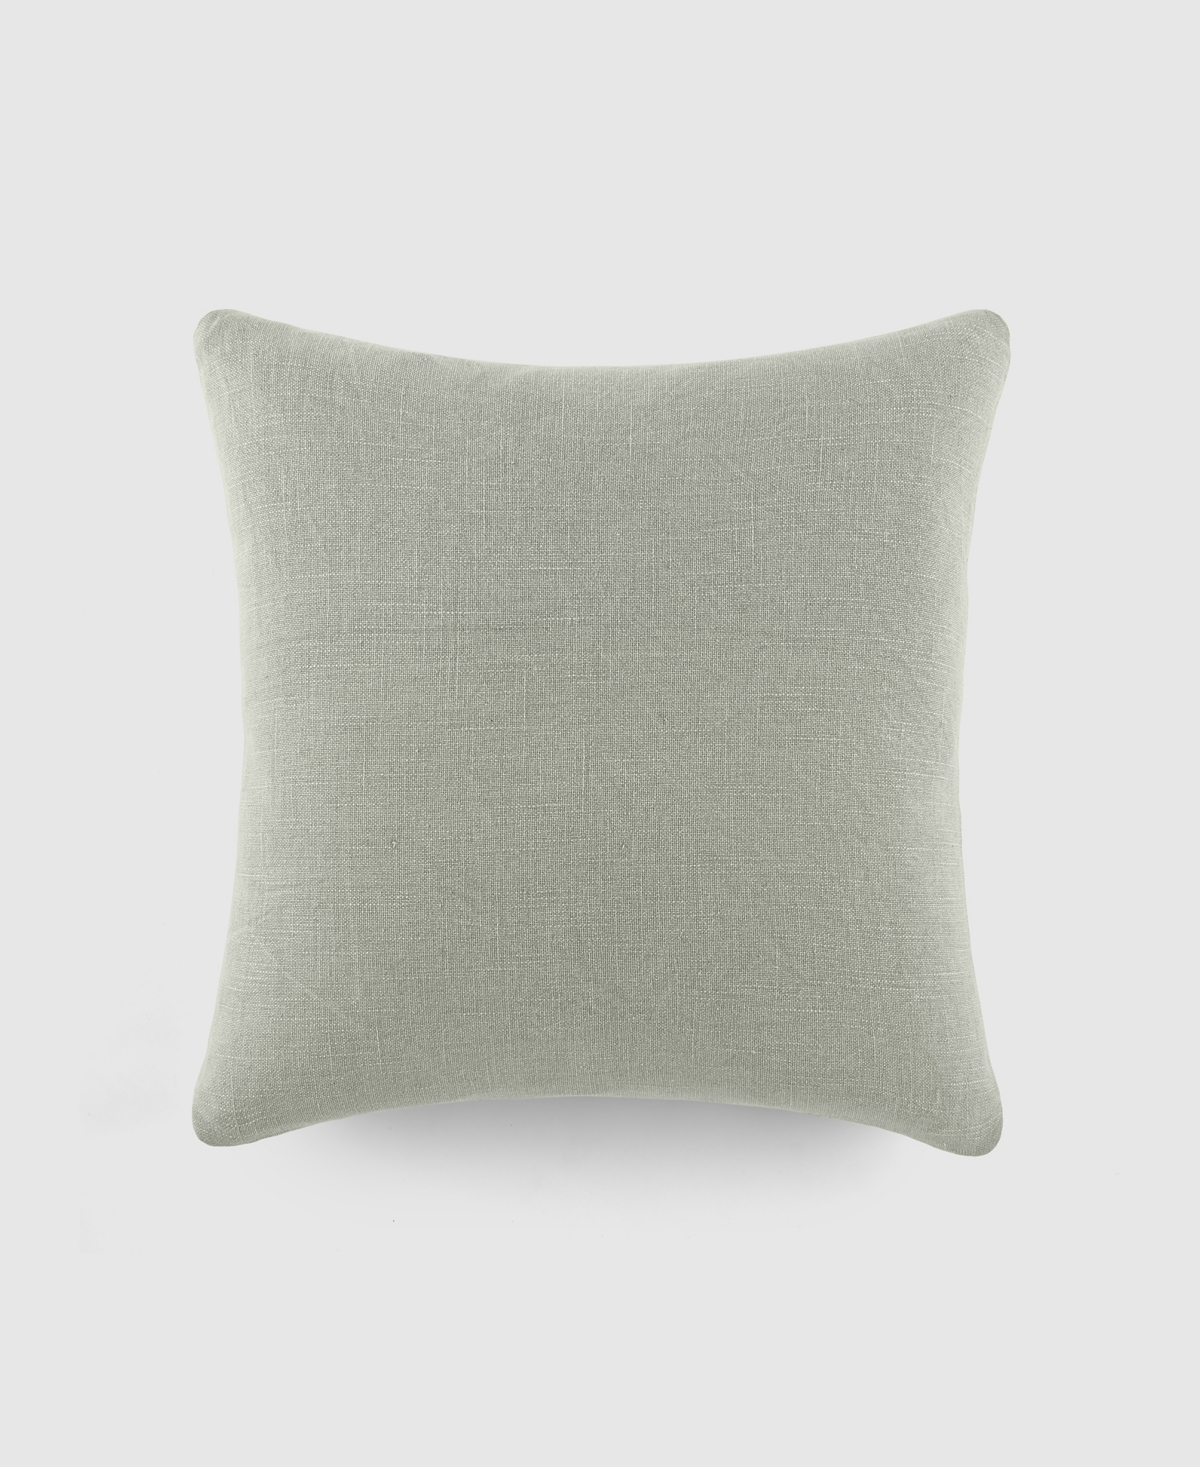 Ienjoy Home Washed And Distressed Decorative Pillow, 20" X 20" In Light Gray